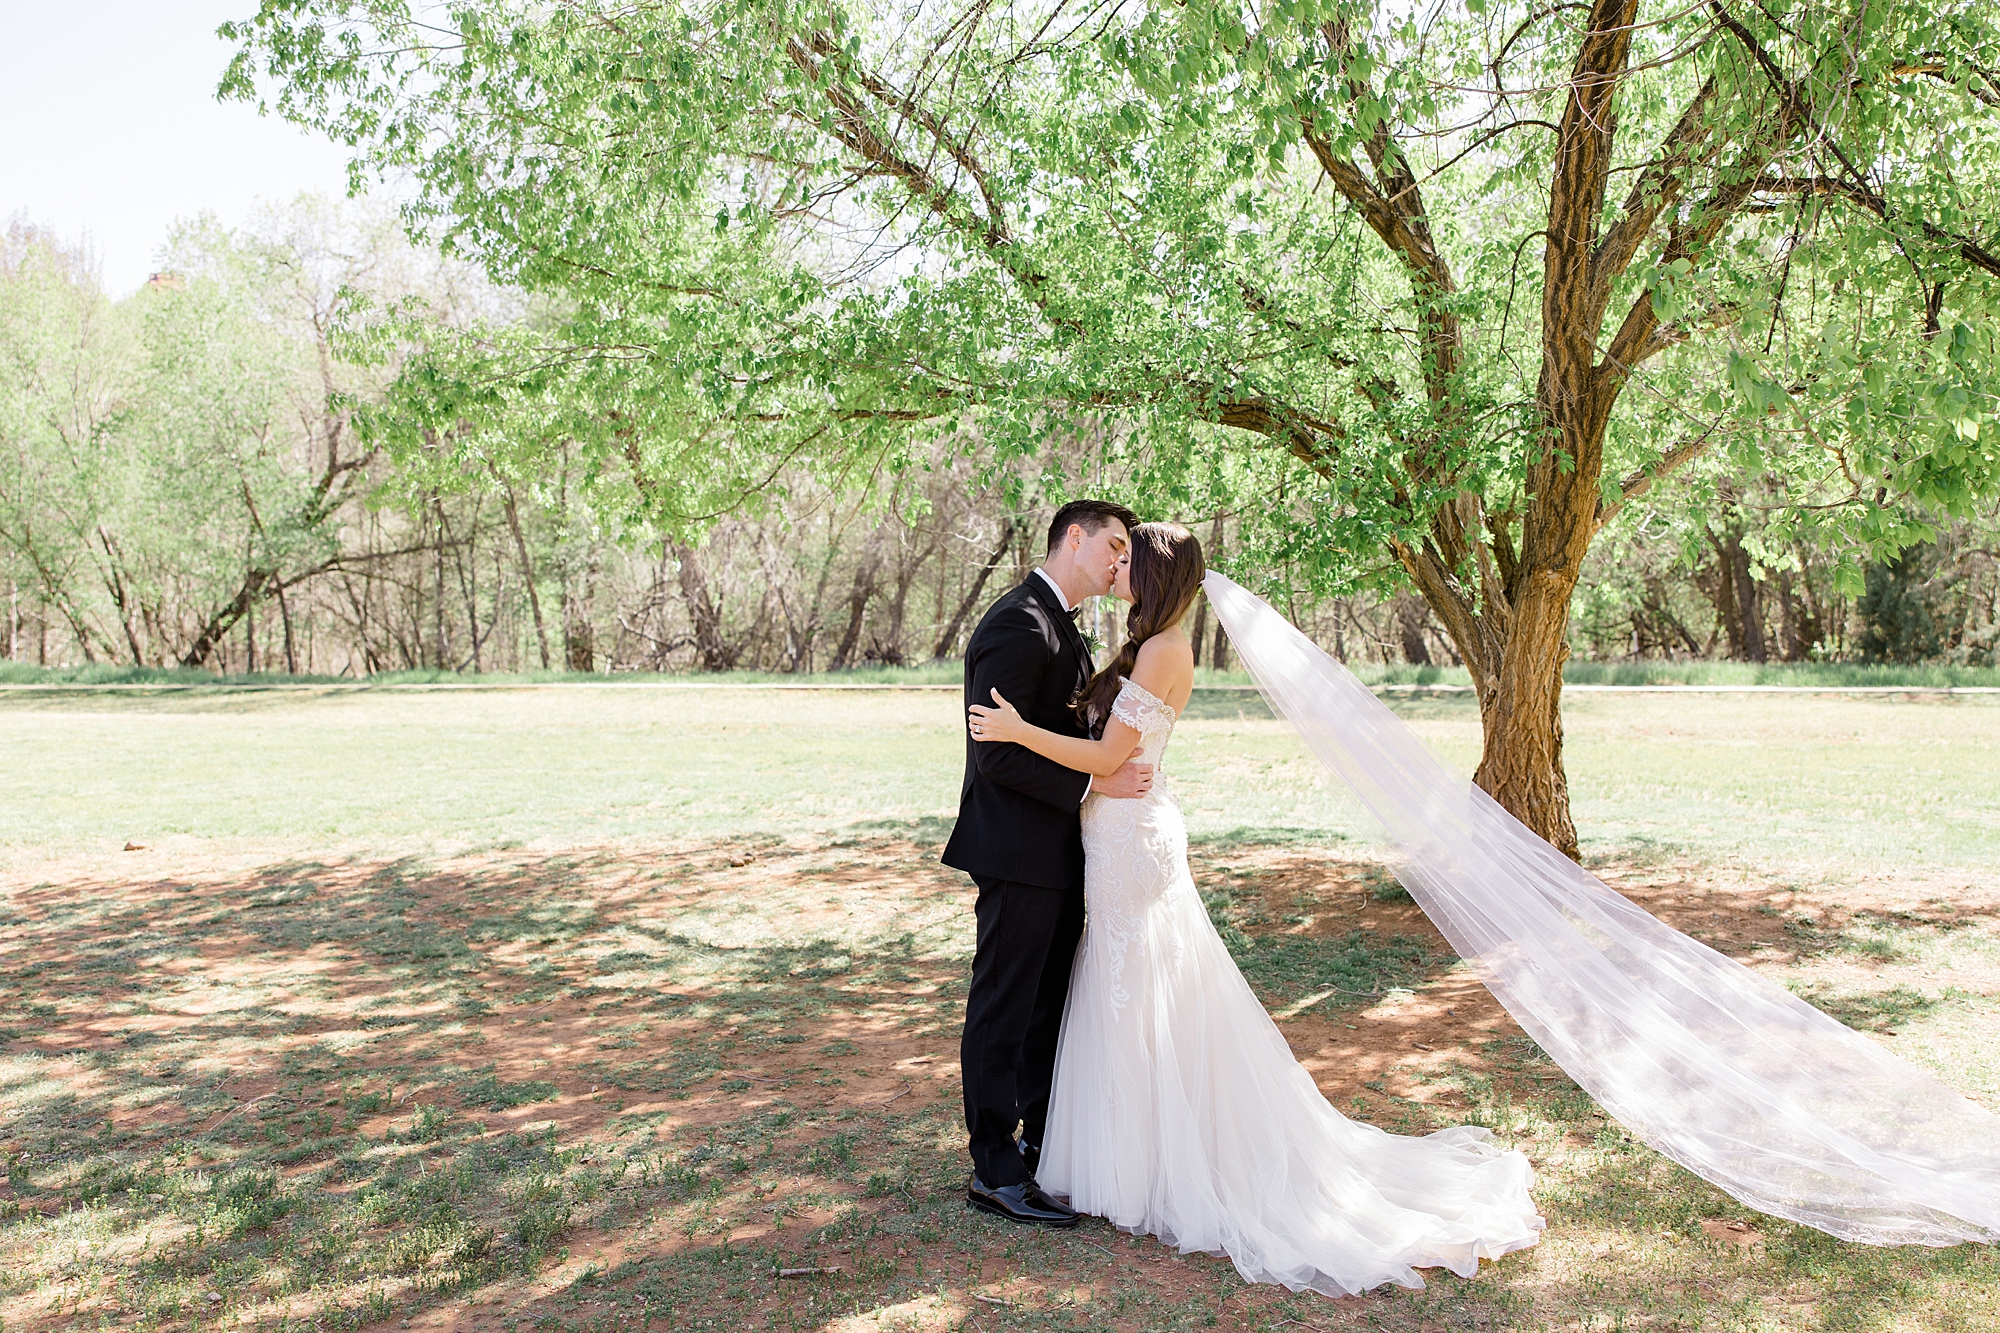 newlyweds kiss under tree with bride's veil floating 